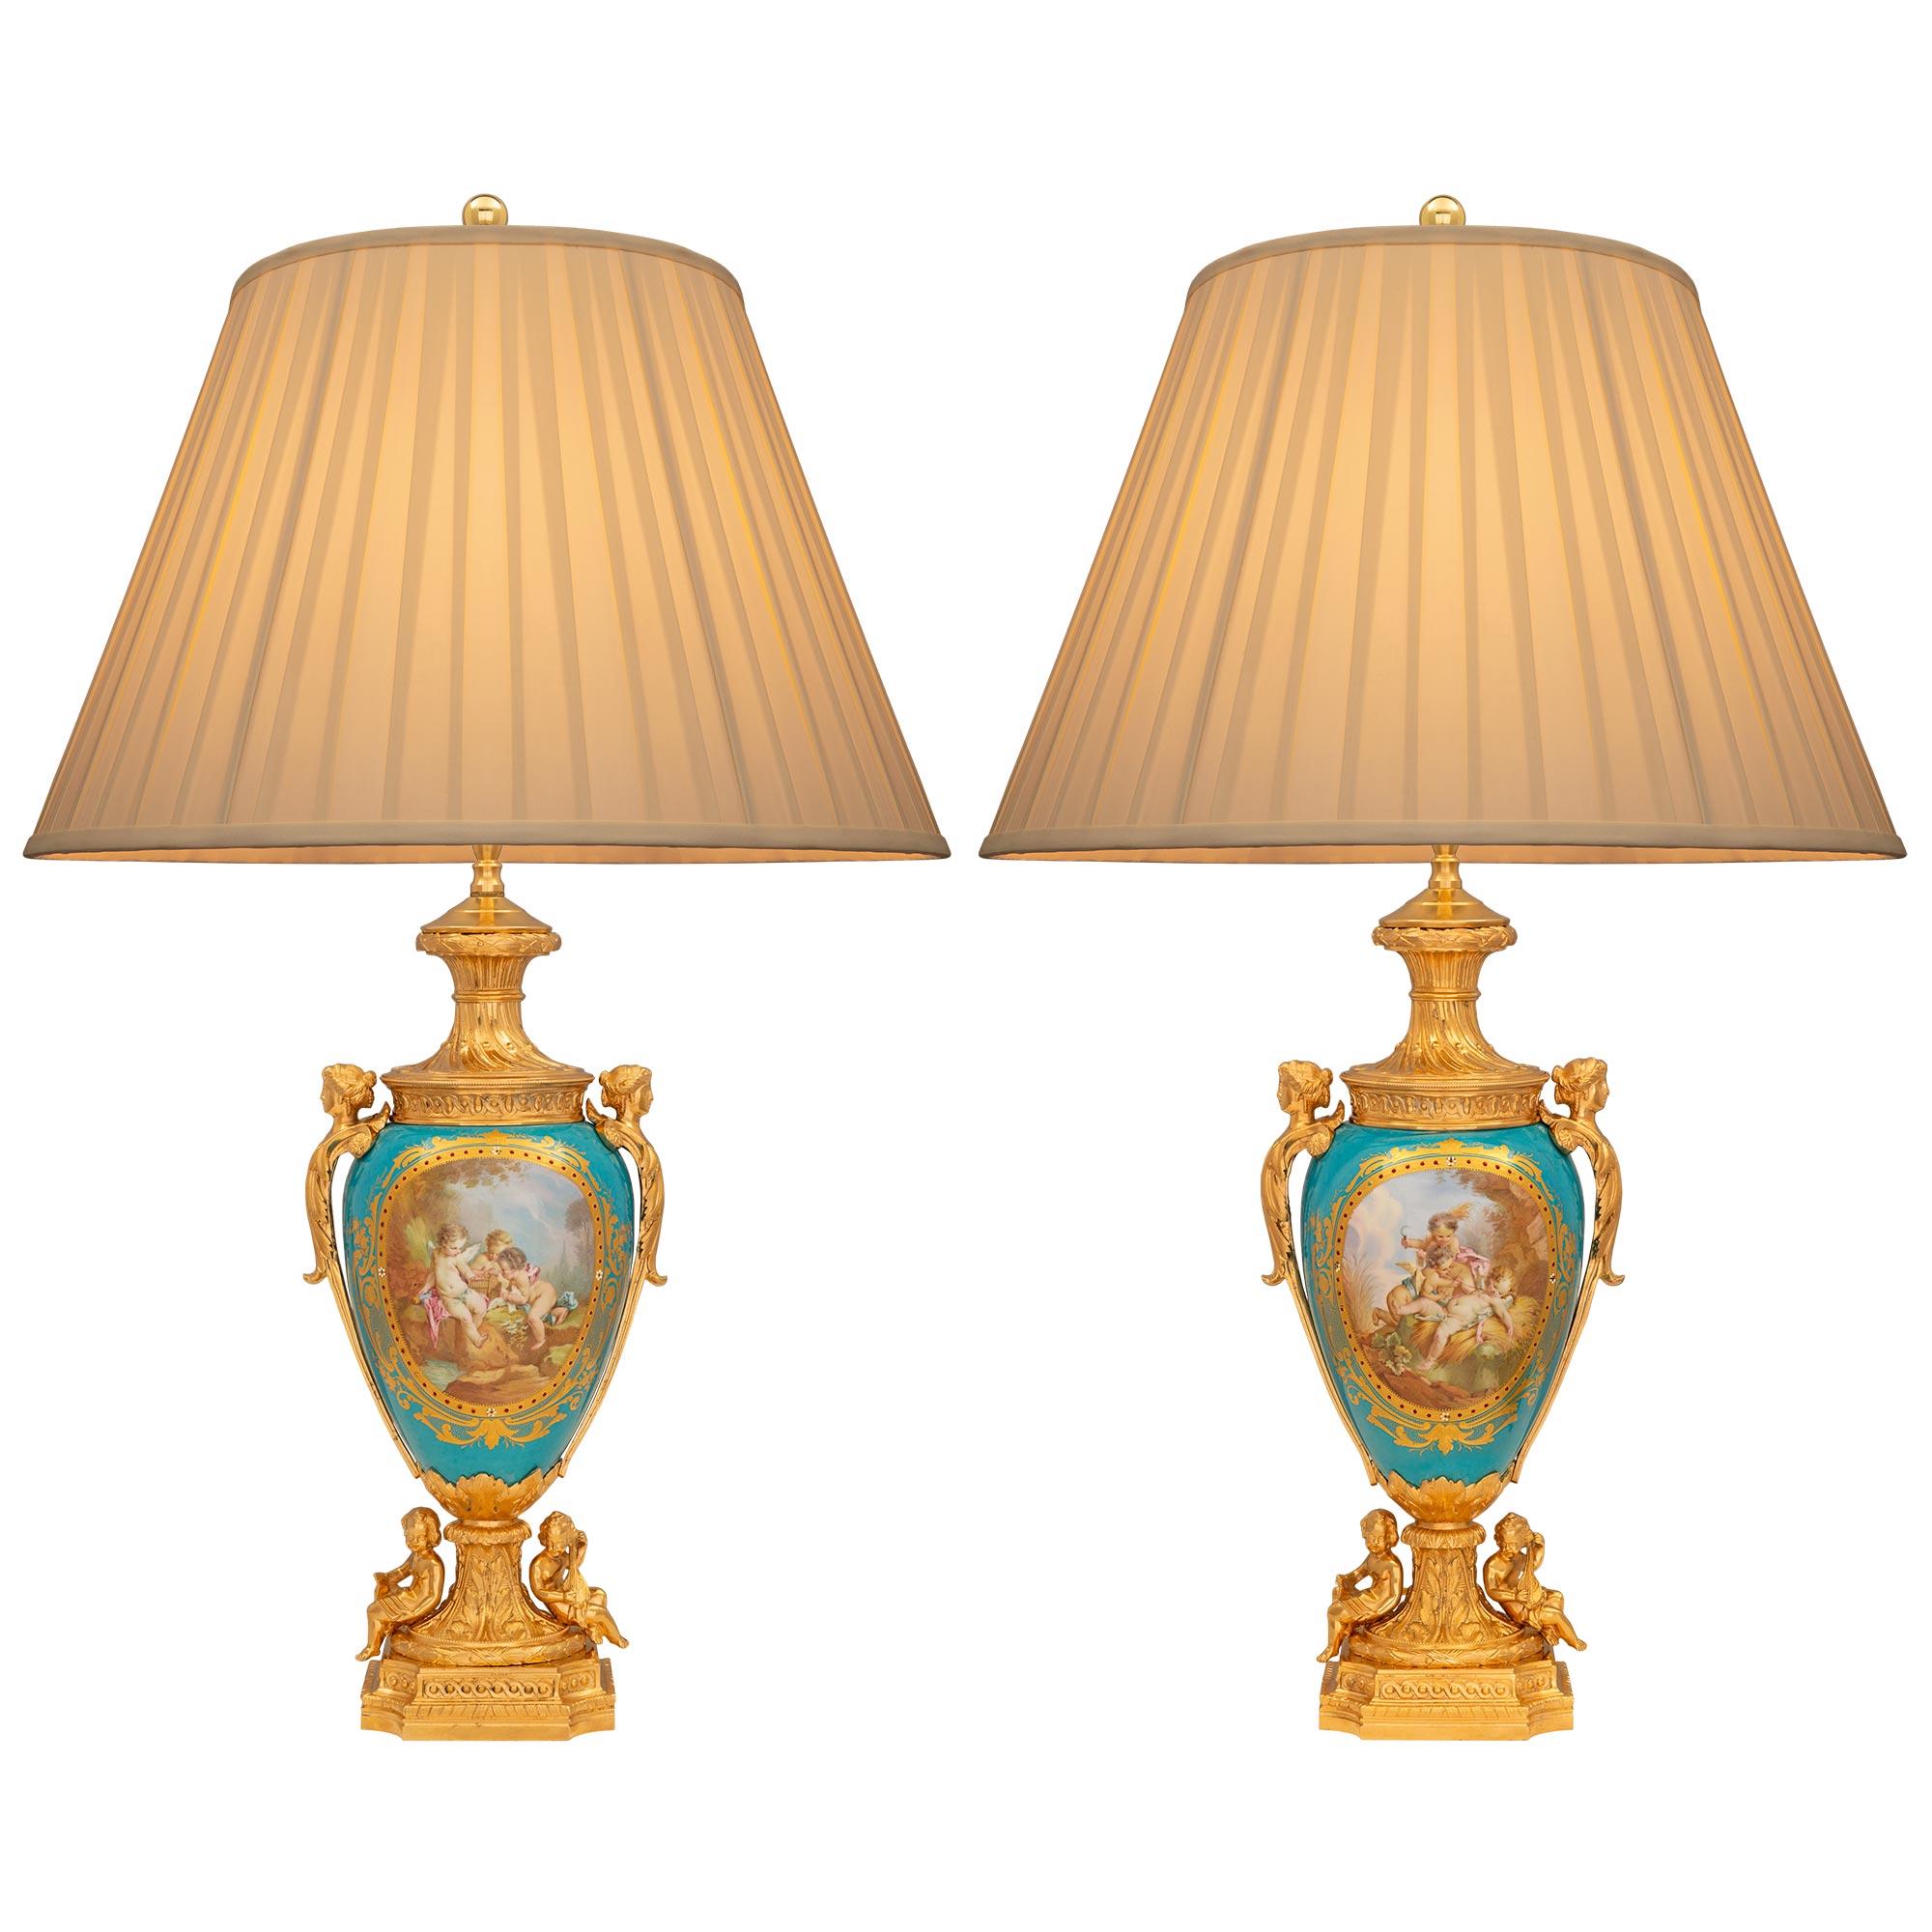 A beautiful and most elegant pair of French 19th century Louis XVI st. ormolu and Sèvres Porcelain lamps. Each lamp is raised by a striking square ormolu base with fine stepped mottled designs, concave corners, and lovely wrap around twisted rope